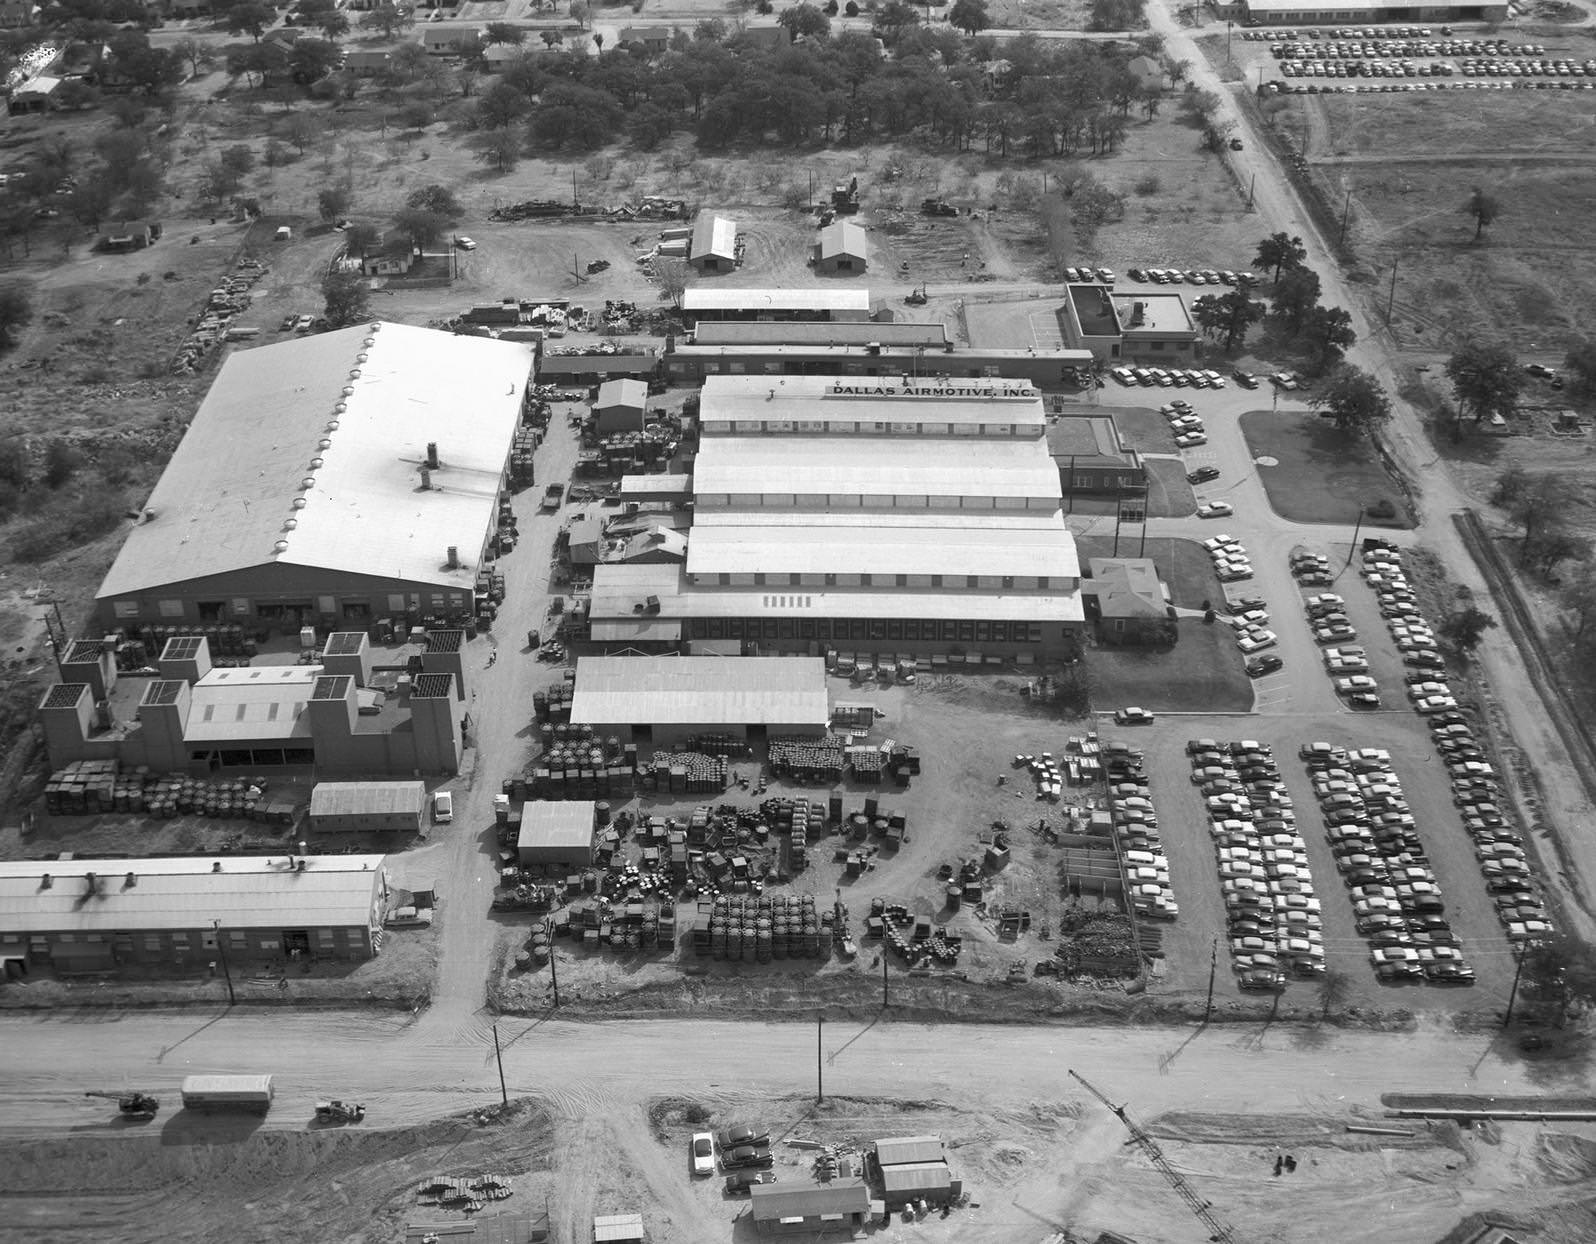 Aerial view of Dallas Airmotive, Incorporated factory and its parking lot, 1956